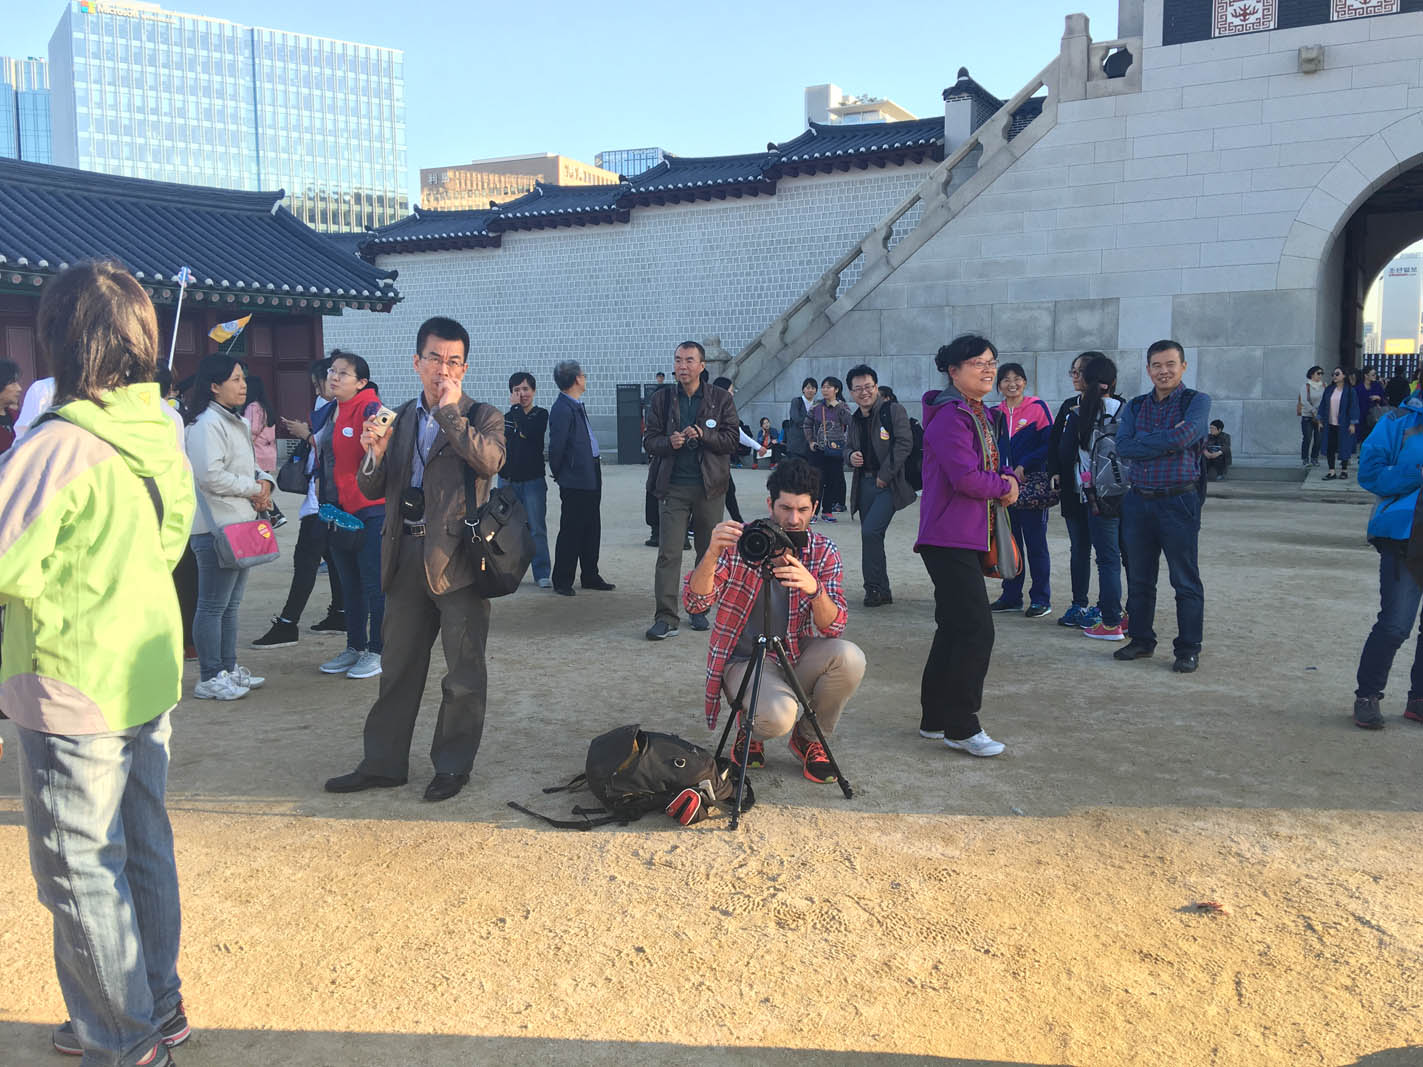 Scott reviewing an image in Gyeongbokgung, Seoul, with crowds as a reference for reference image for Hyperlapse VS Timelapse